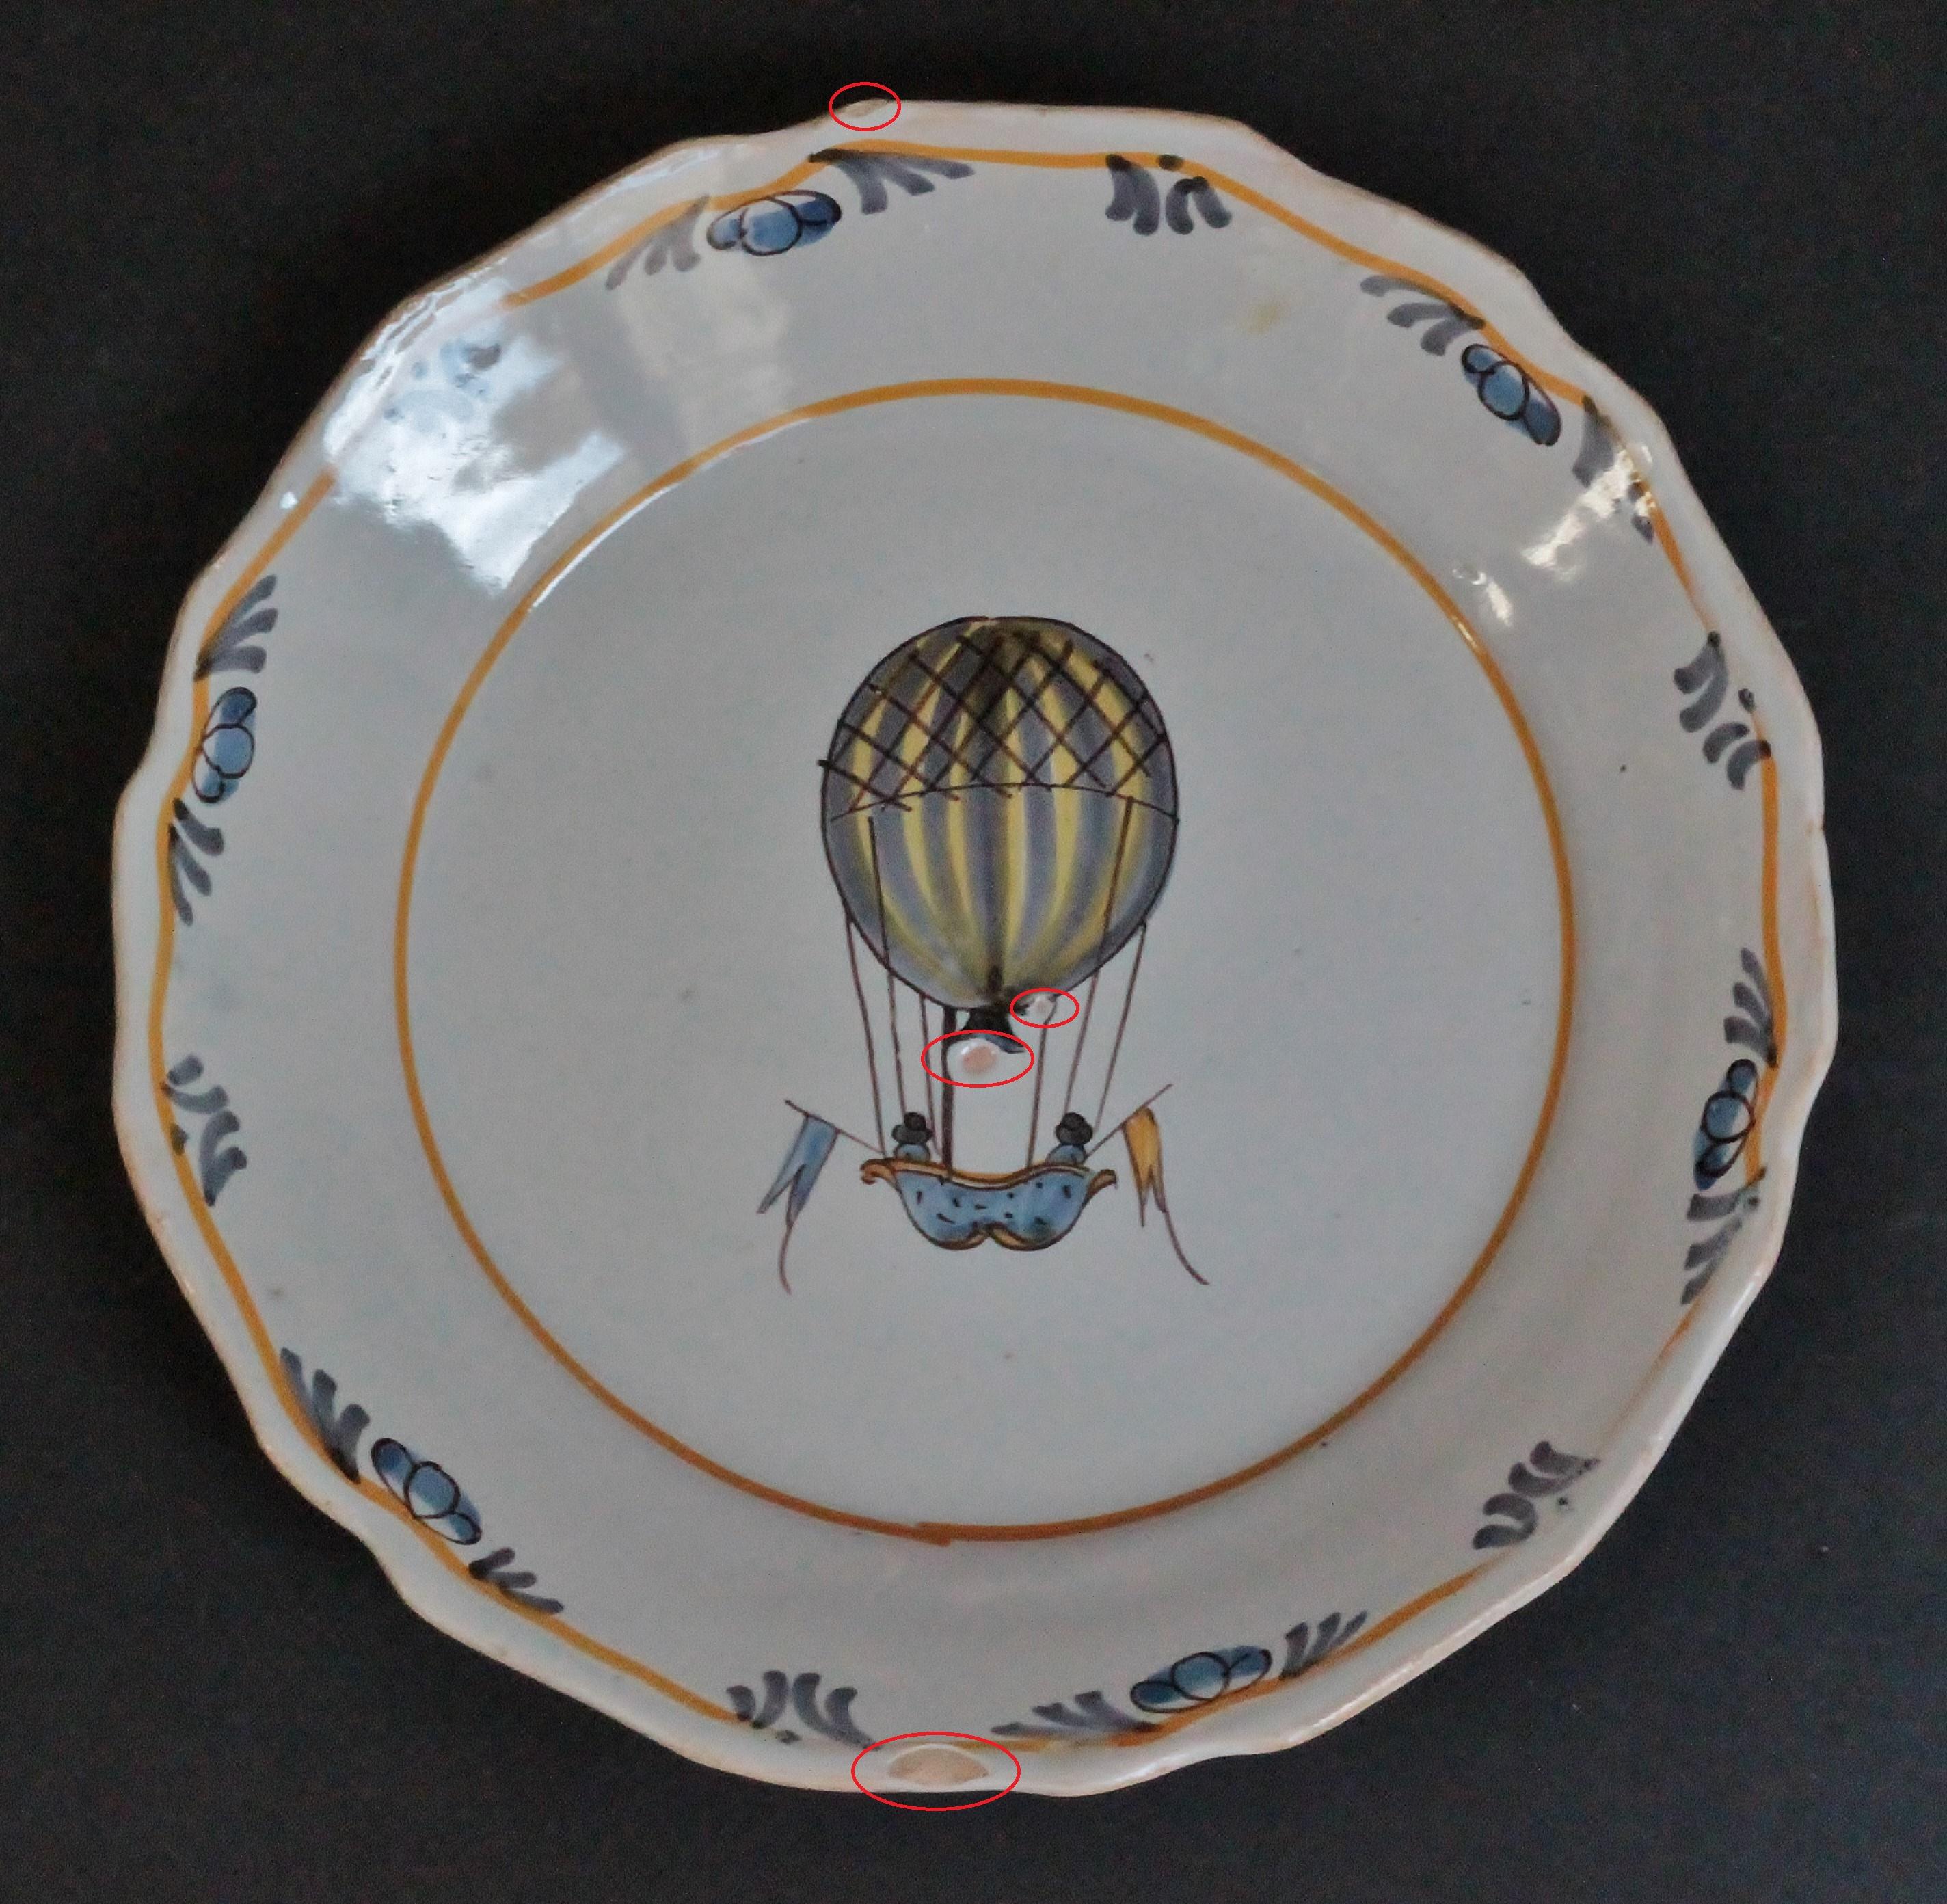 Nevers 'France' Faience Plate with 